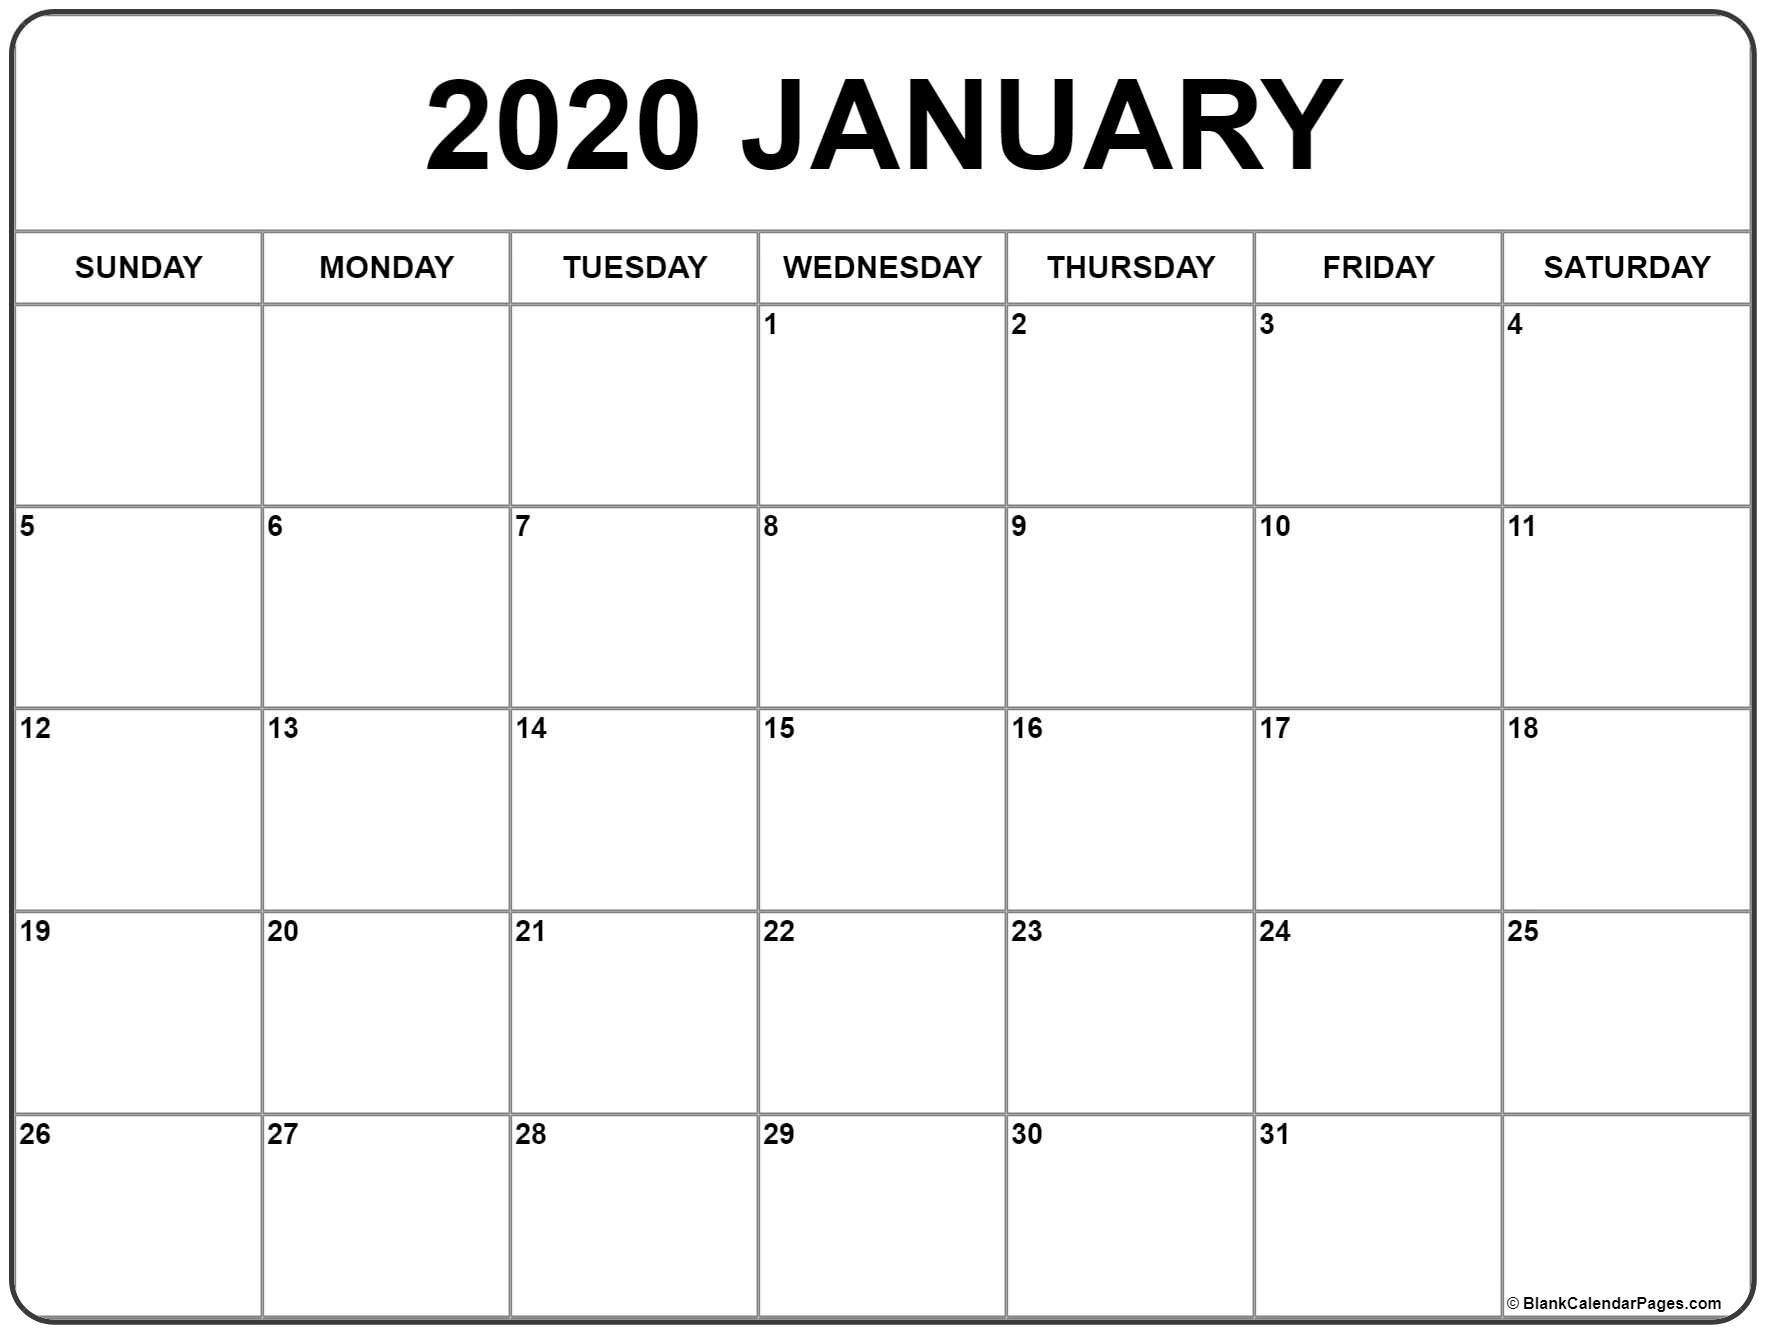 January 2020 Calendar | Free Printable Monthly Calendars Exceptional 2020 Calendar Template That Has Days Numbered